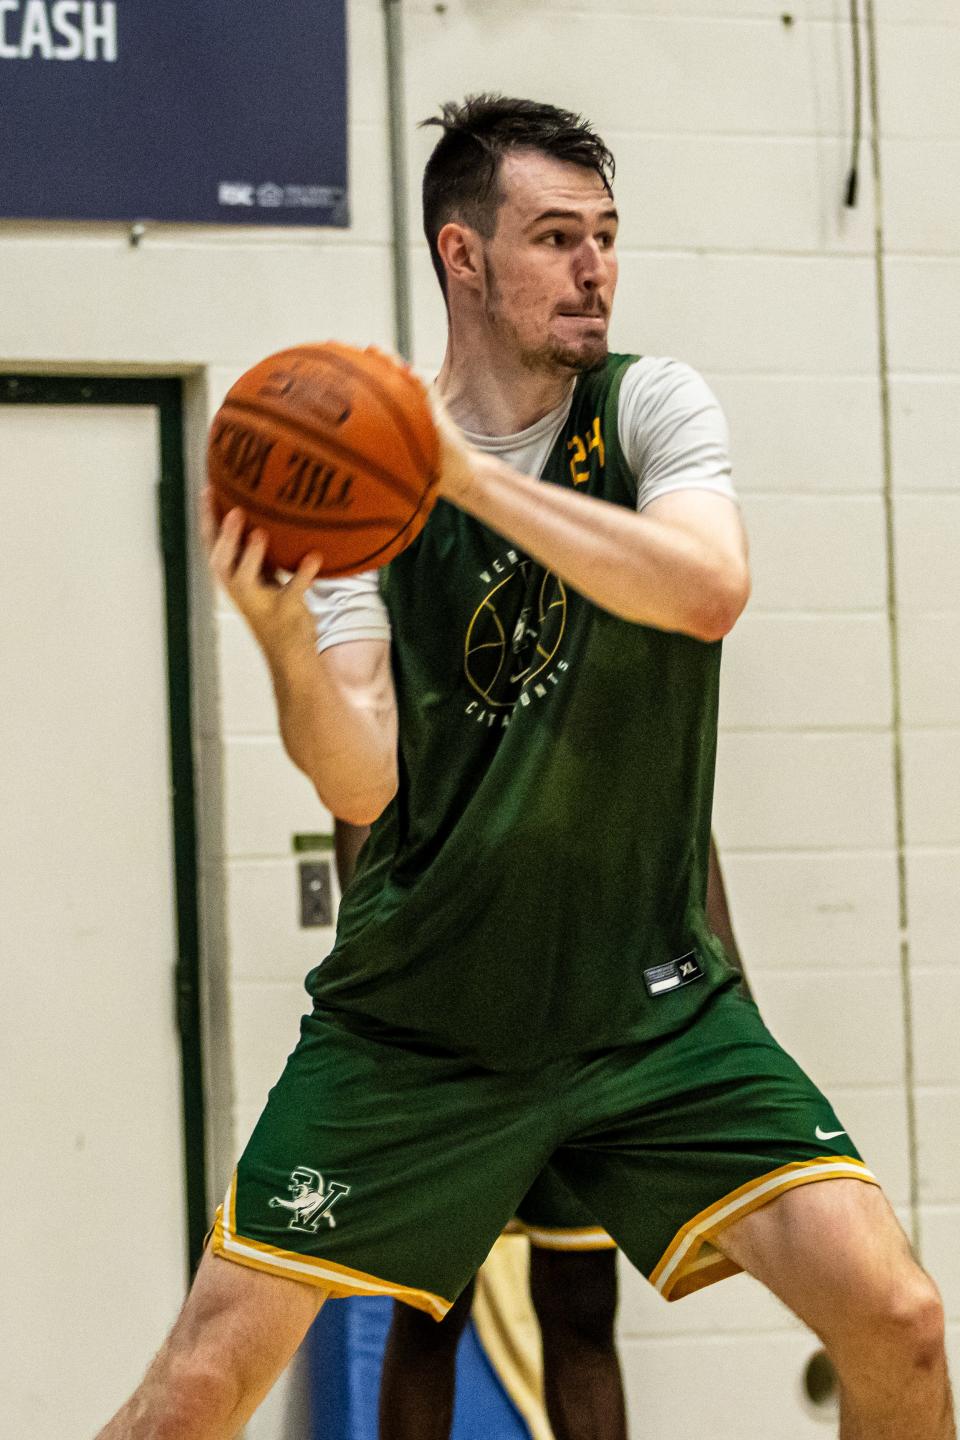 Senior Matt Veretto makes a move during a UVM men's basketball summer practice earlier this month at Patrick Gym.